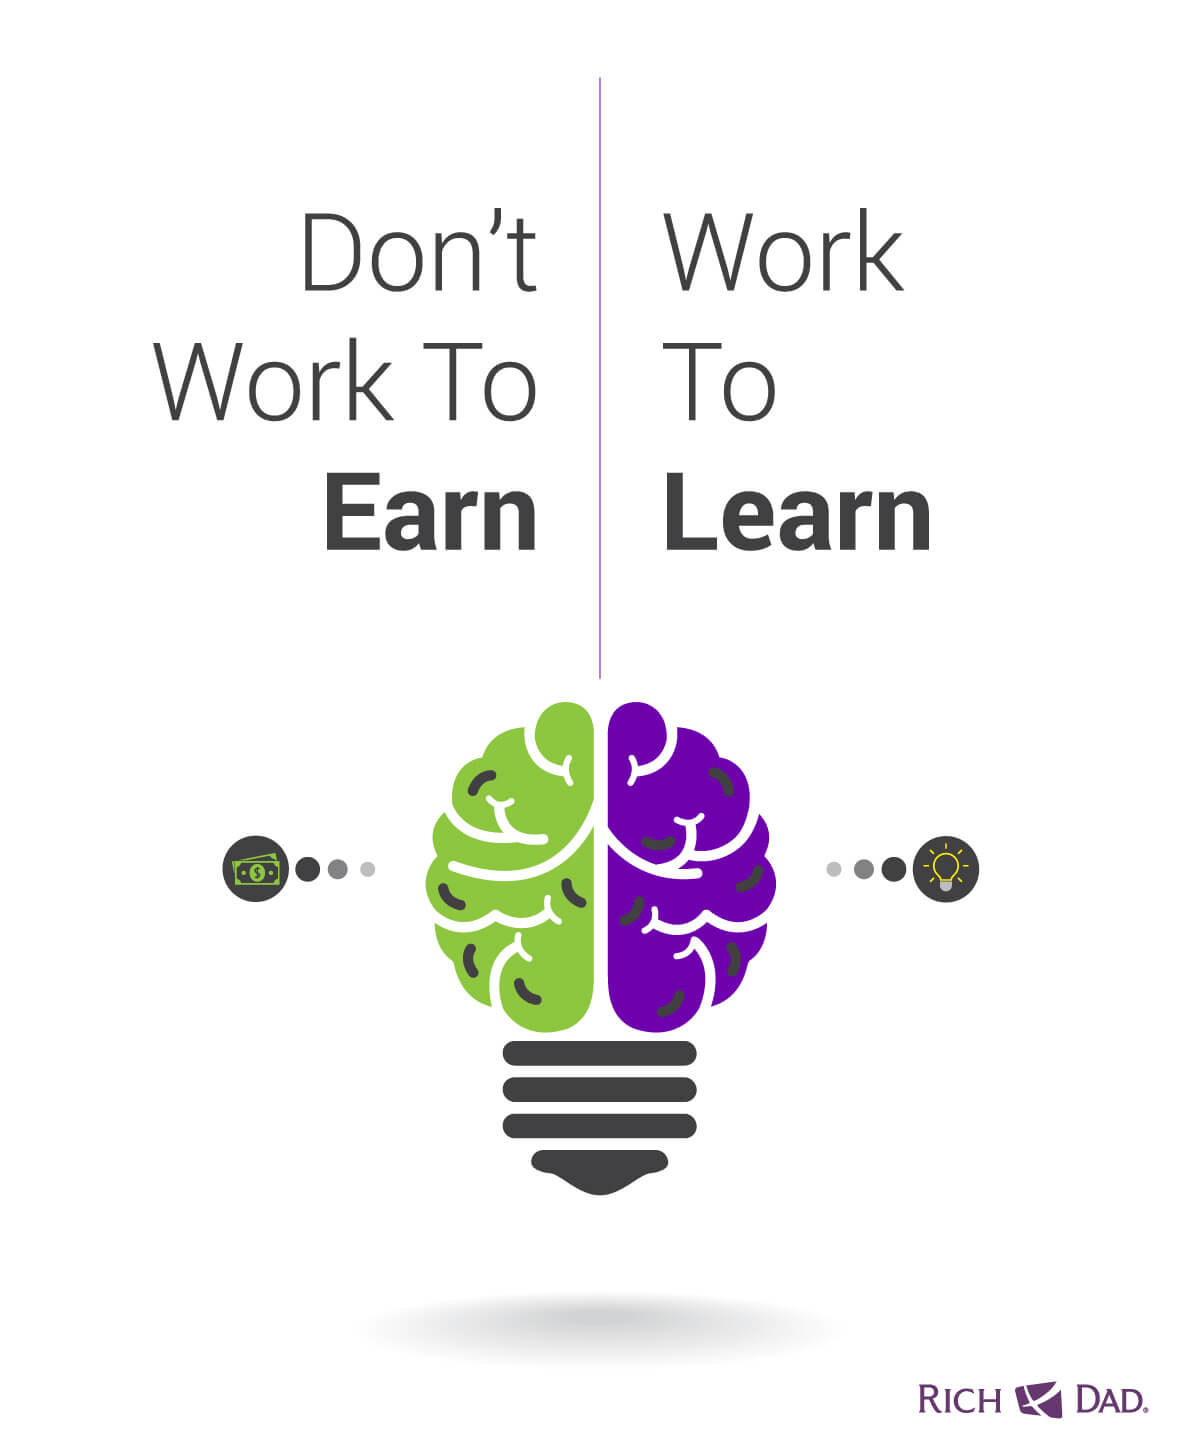 Don't work to earn, Work to learn